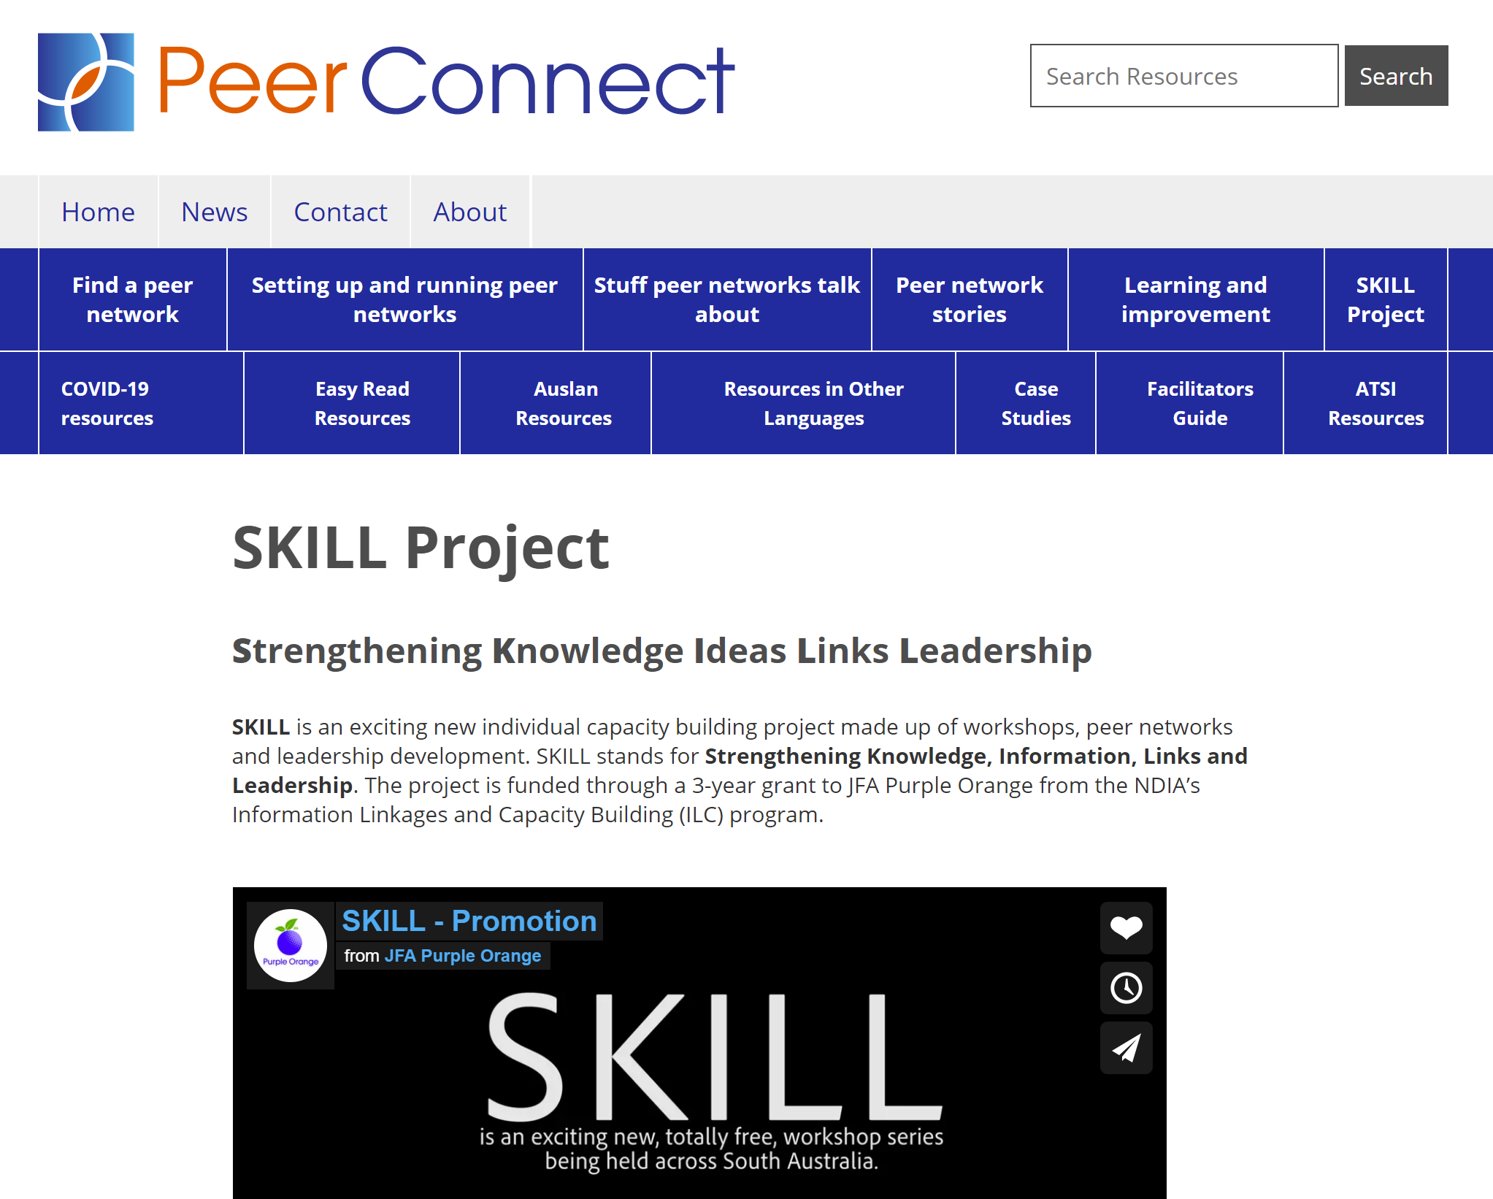 Image of the Peer Connect website home page